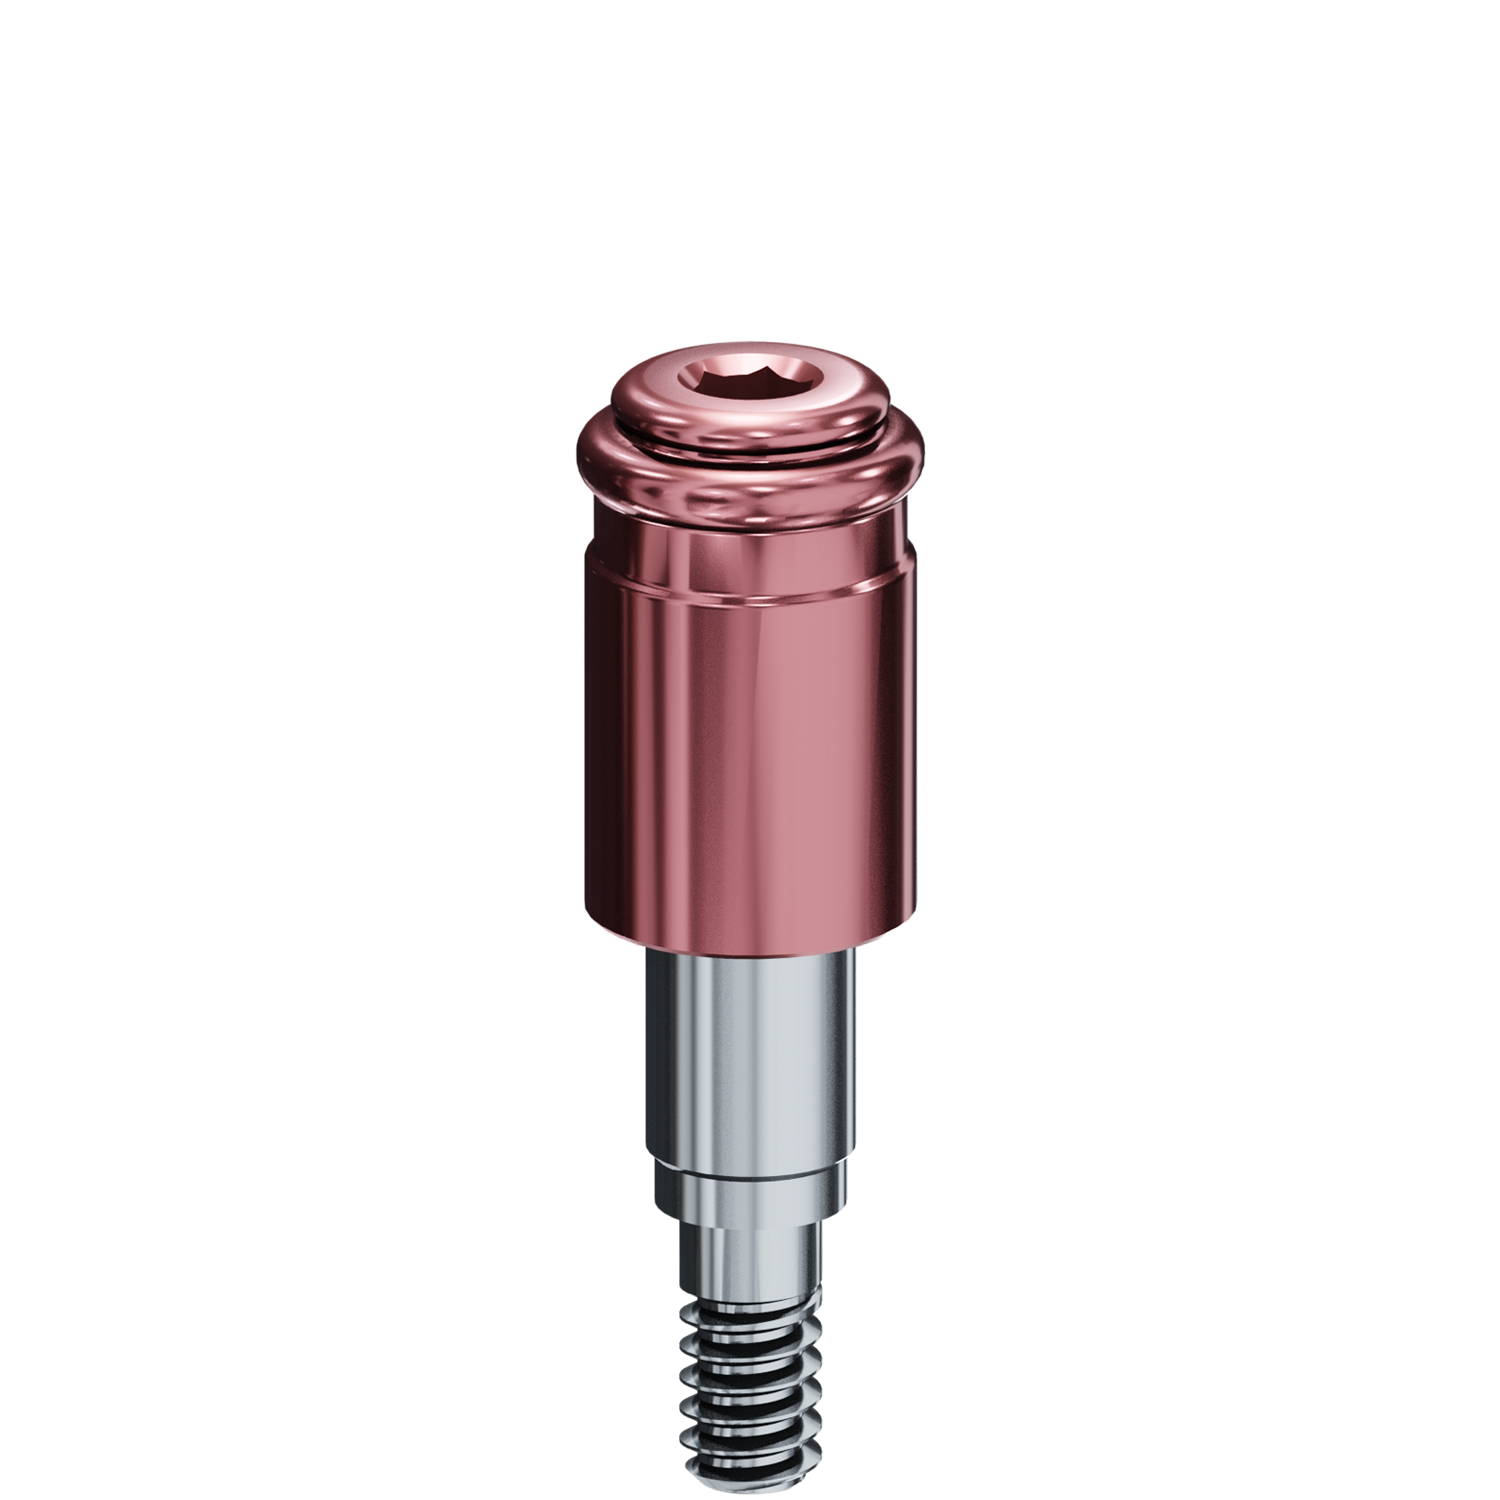 R-Tx Attachment System - 3.4mm Biomet 3i® Certain Connection - 048" Drive - 4.0mm